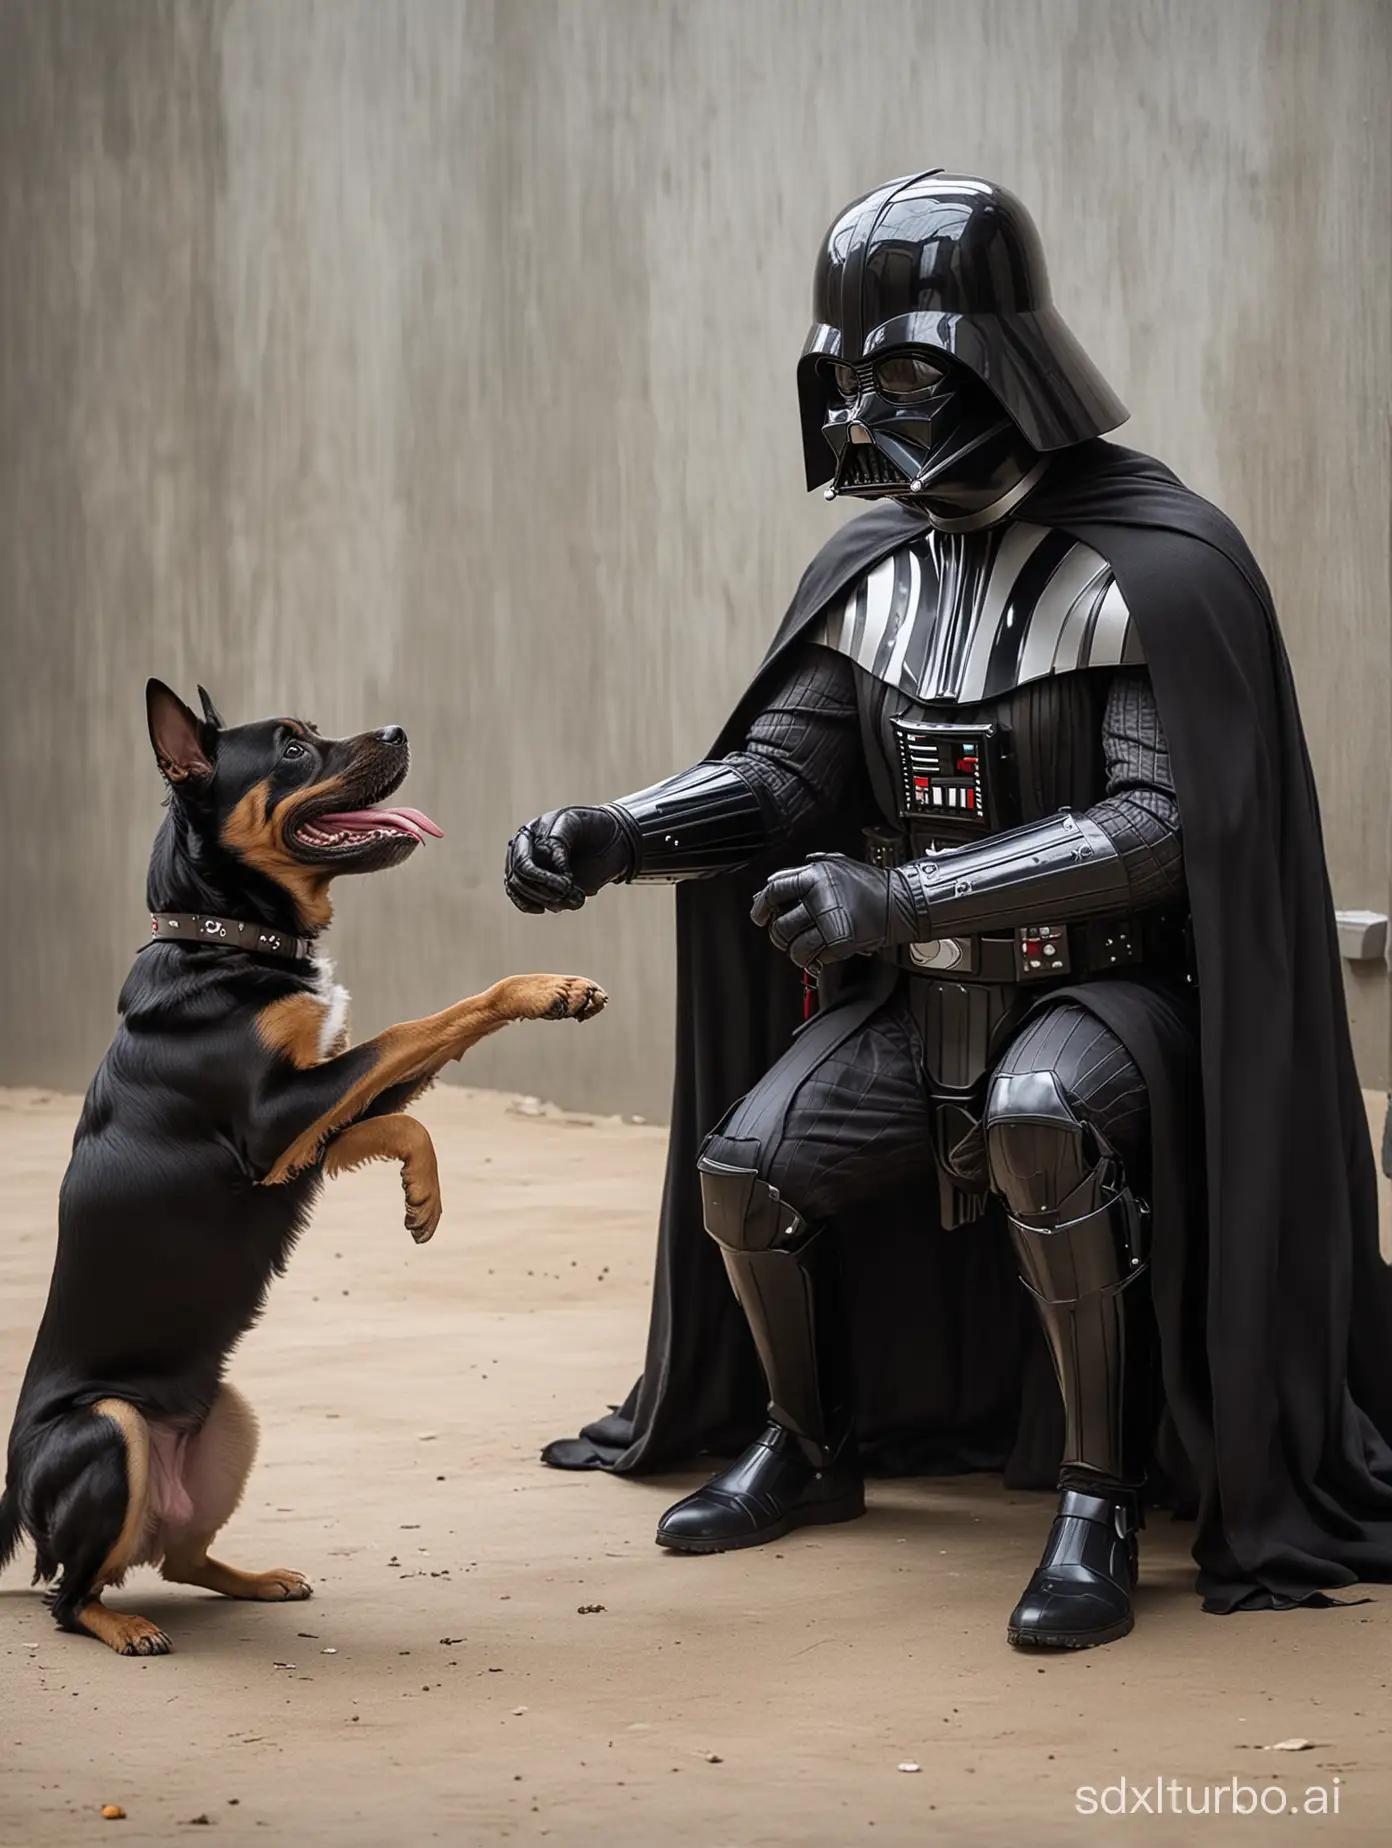 Darth Vader playing with a dog with a smile